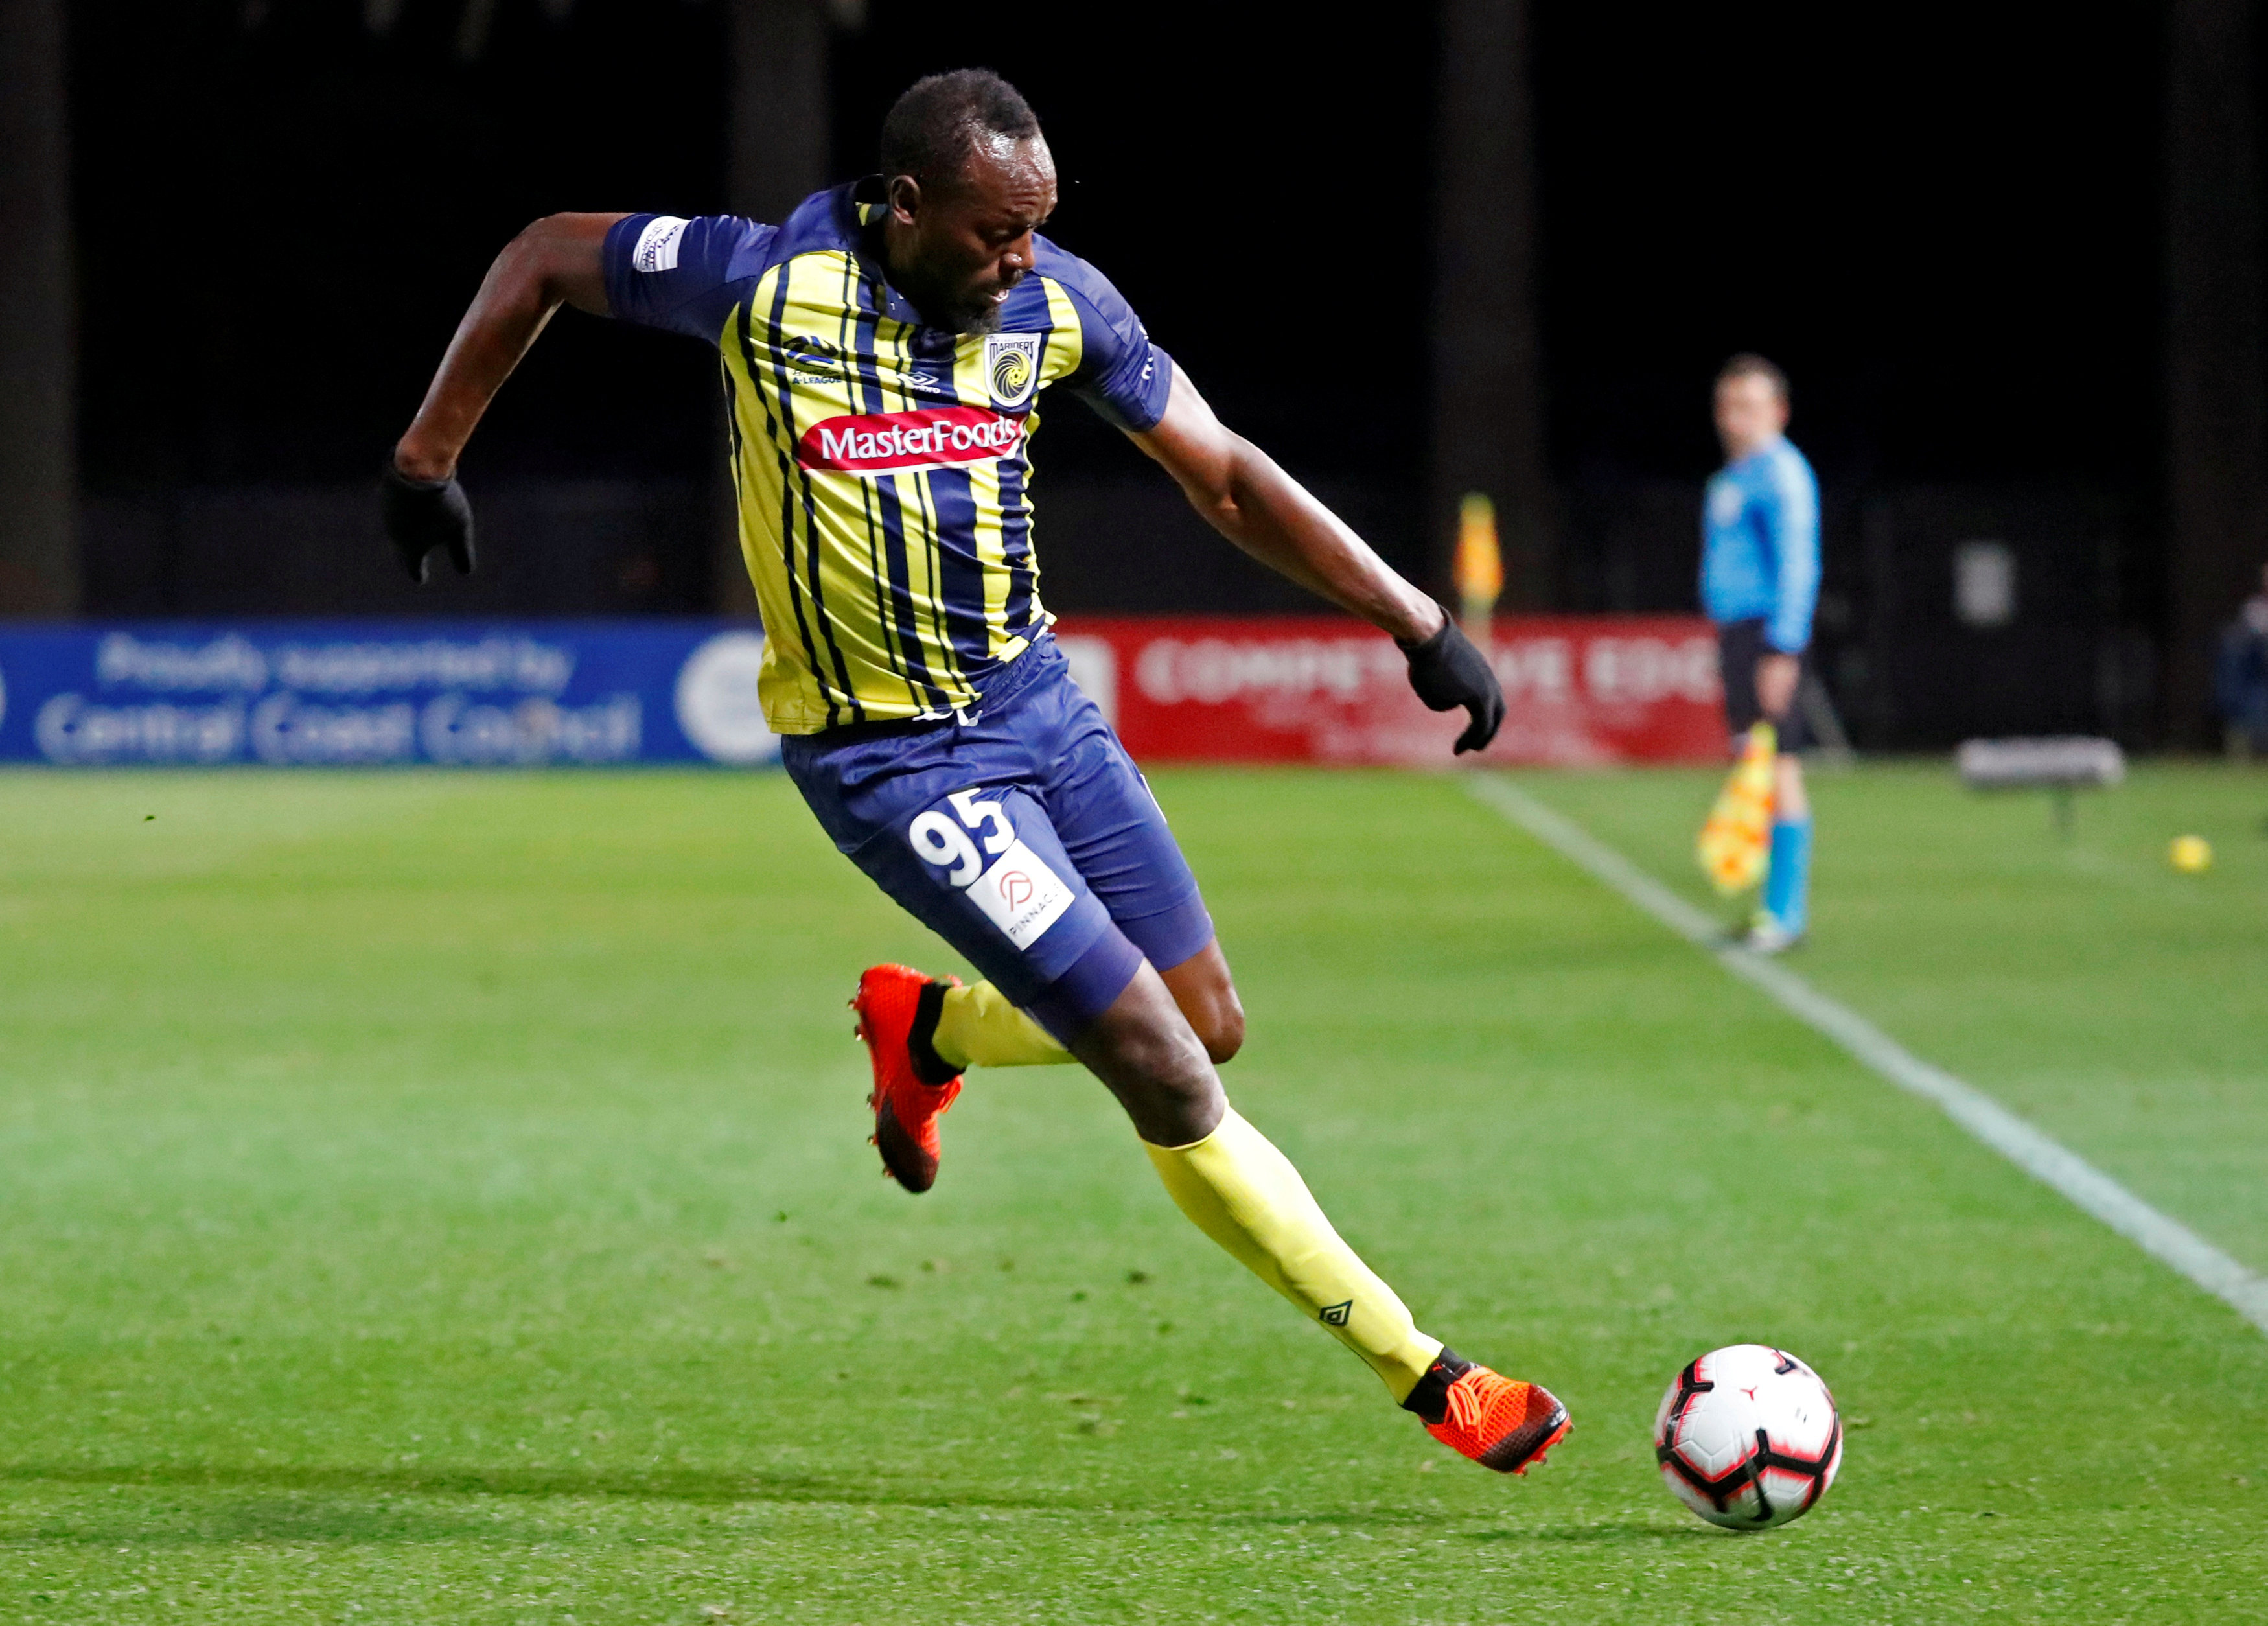 FILE PHOTO: Soccer Football - Central Coast Mariners v Central Coast Select - Central Coast Stadium, Gosford, Australia - August 31, 2018  Central Coast Mariners' Usain Bolt in action.  REUTERS